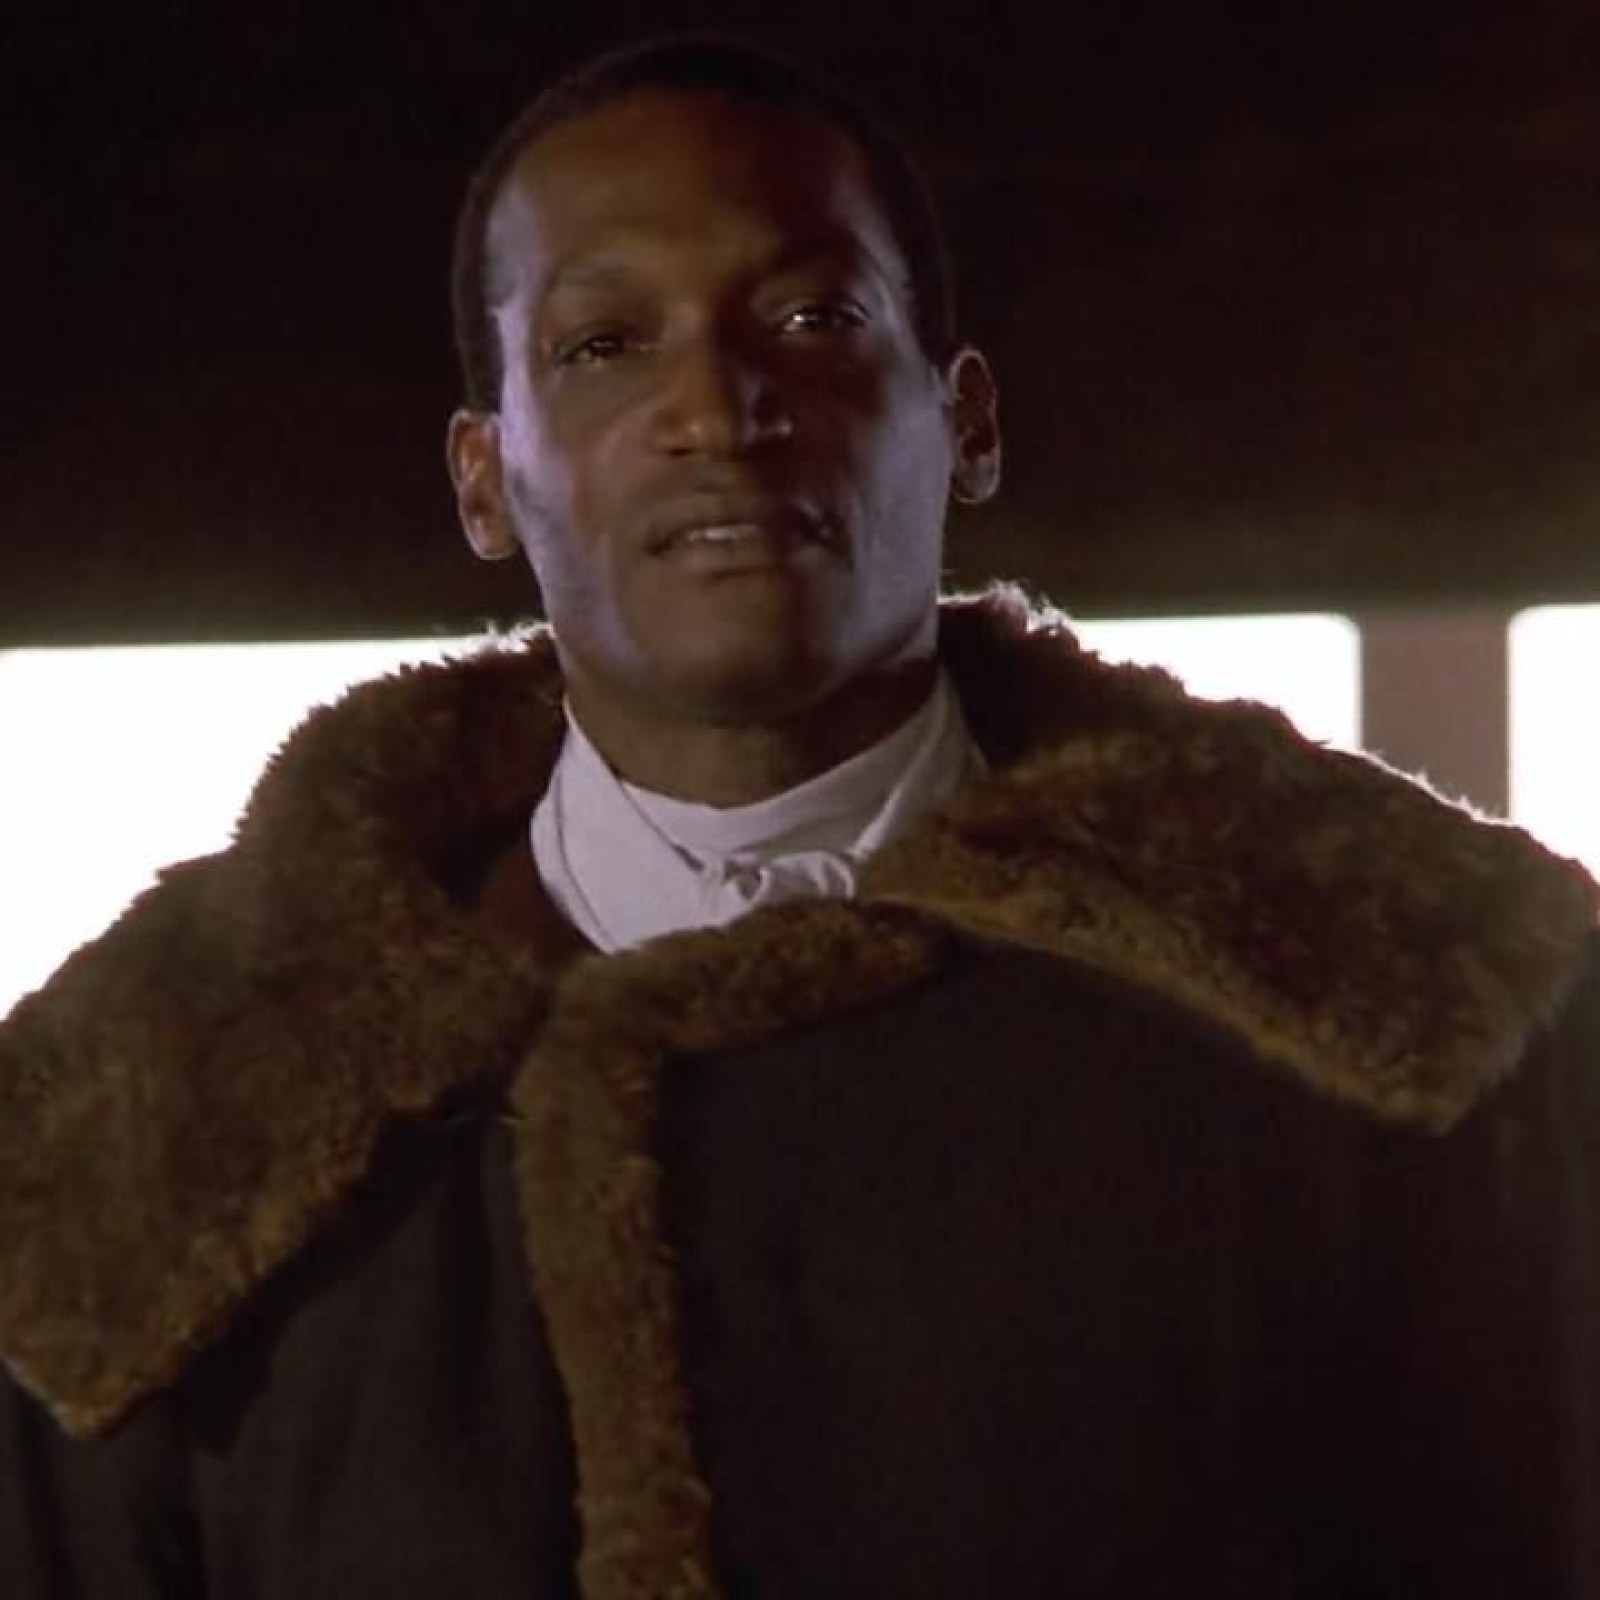 how many candyman movies are there